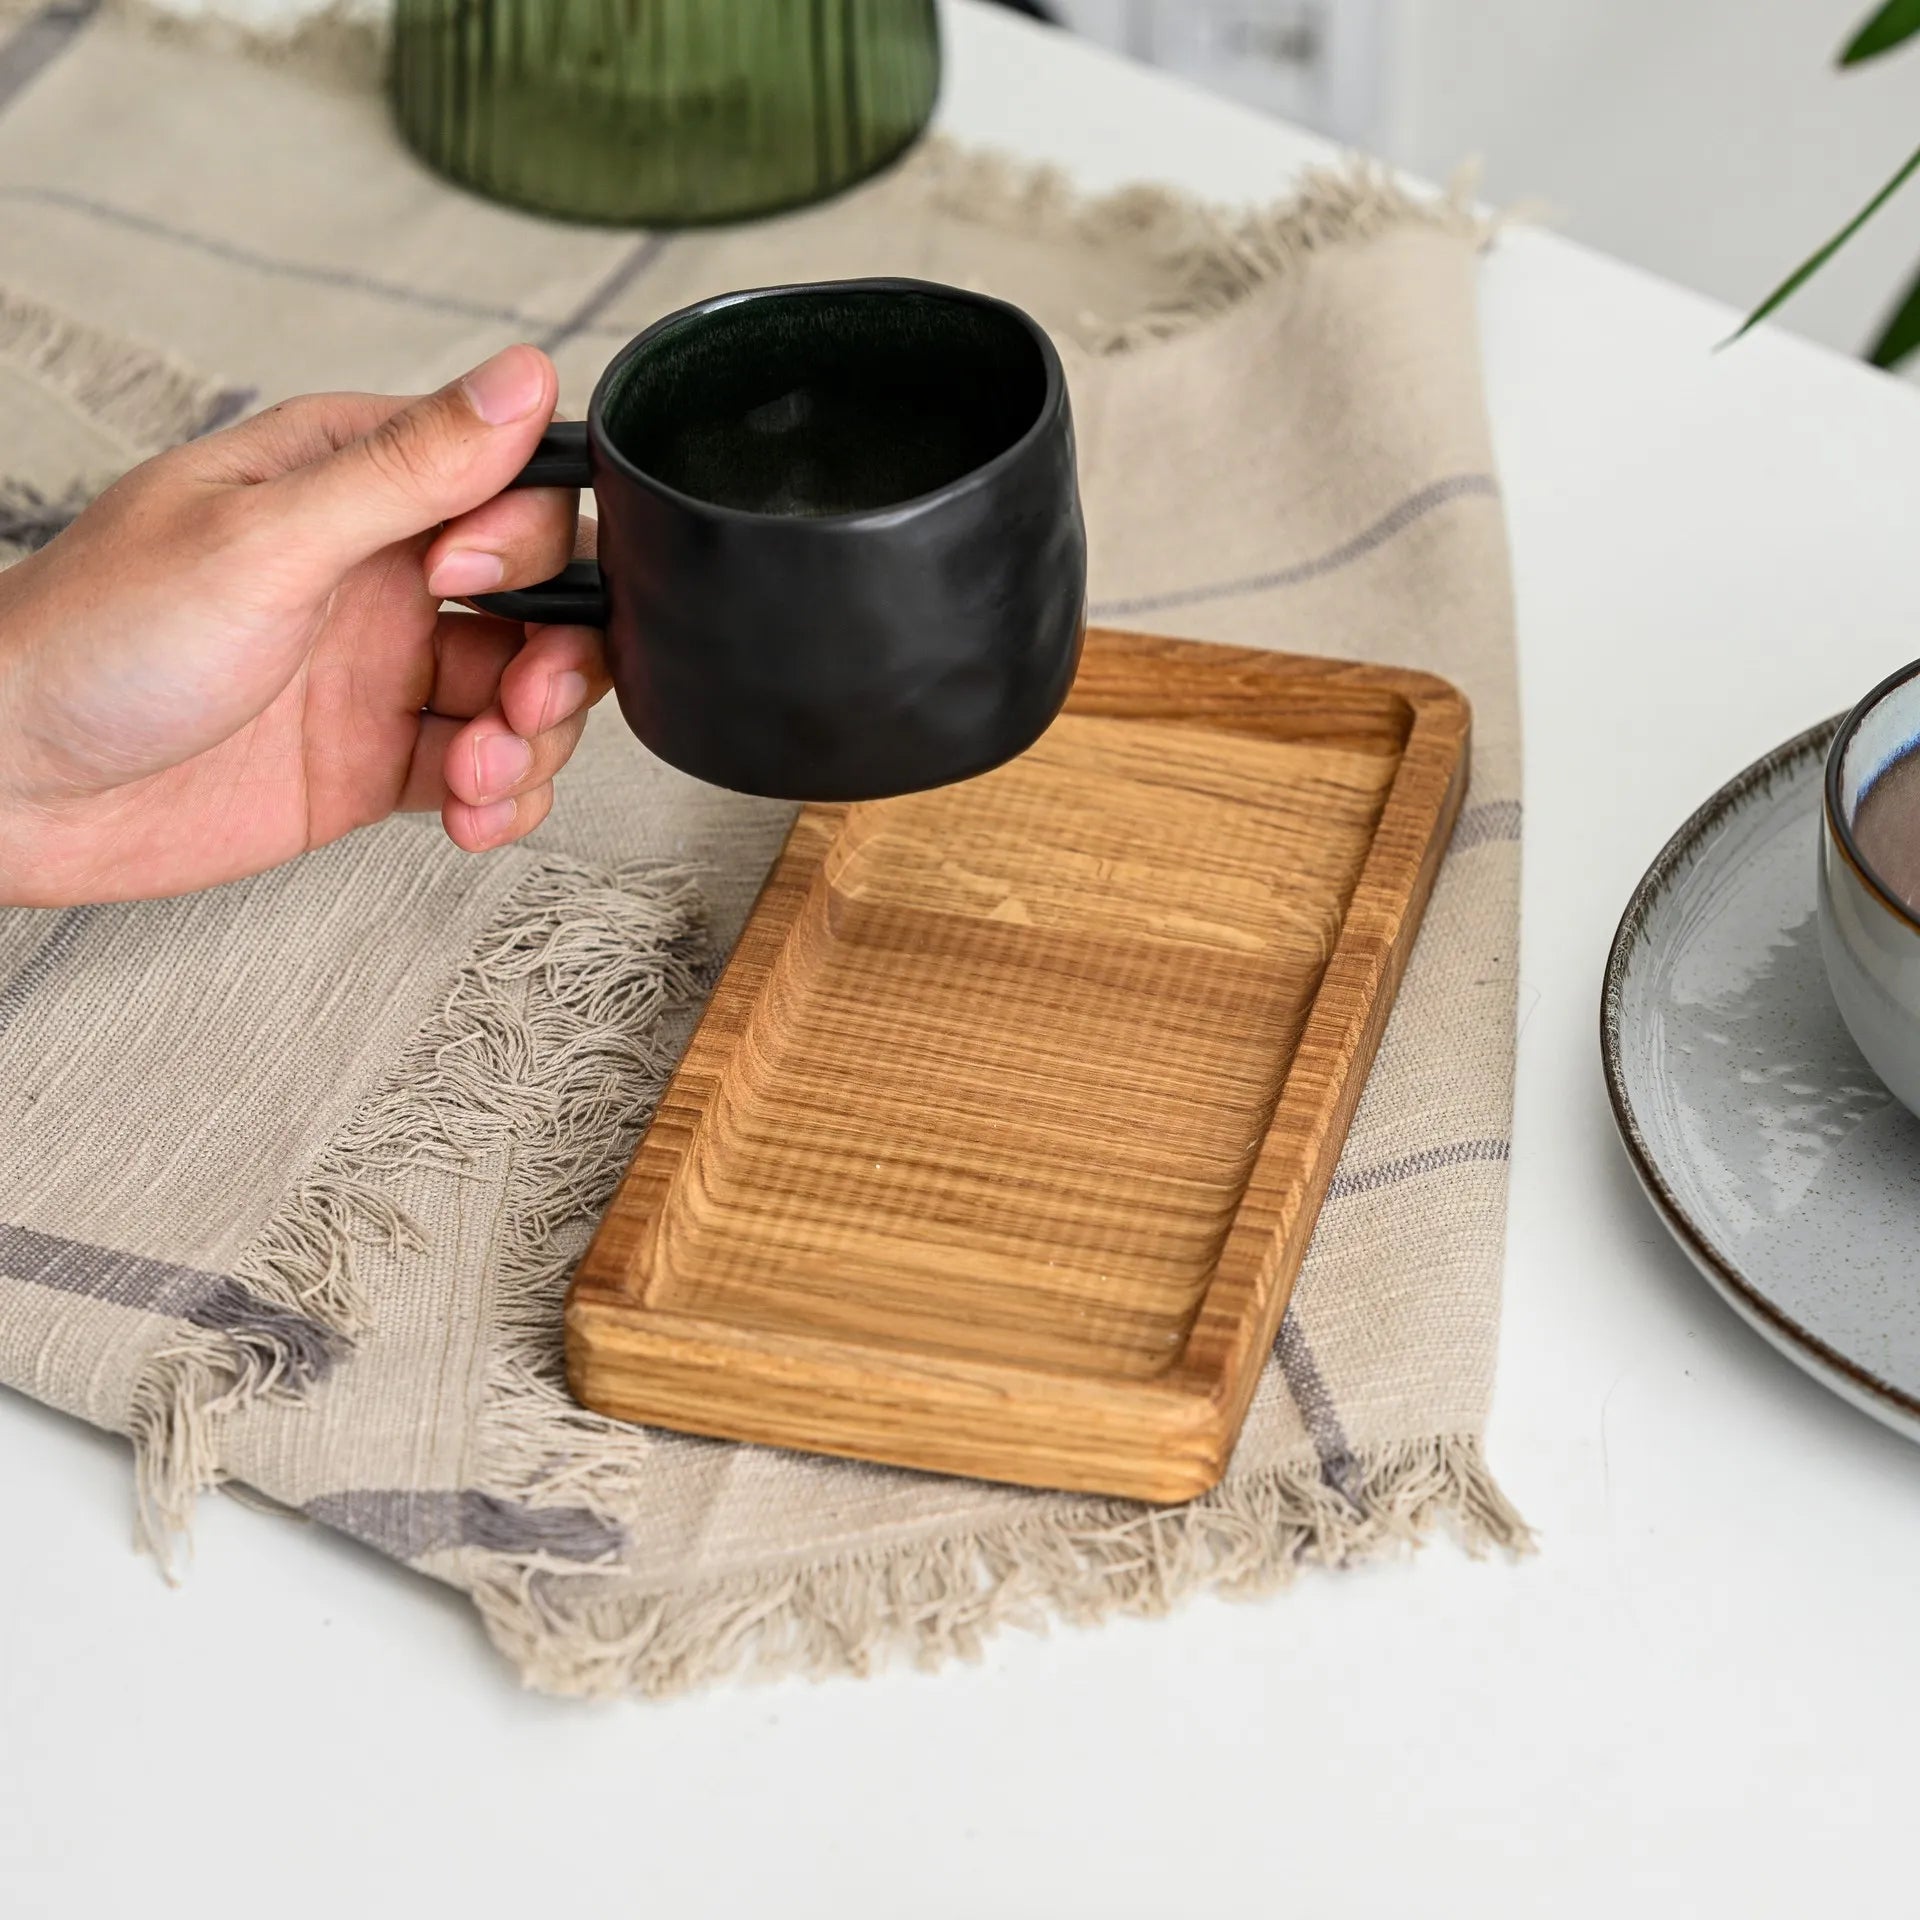 This custom wooden serving tray is ideal for restaurant kitchens, offering a blend of functionality and rustic appeal.